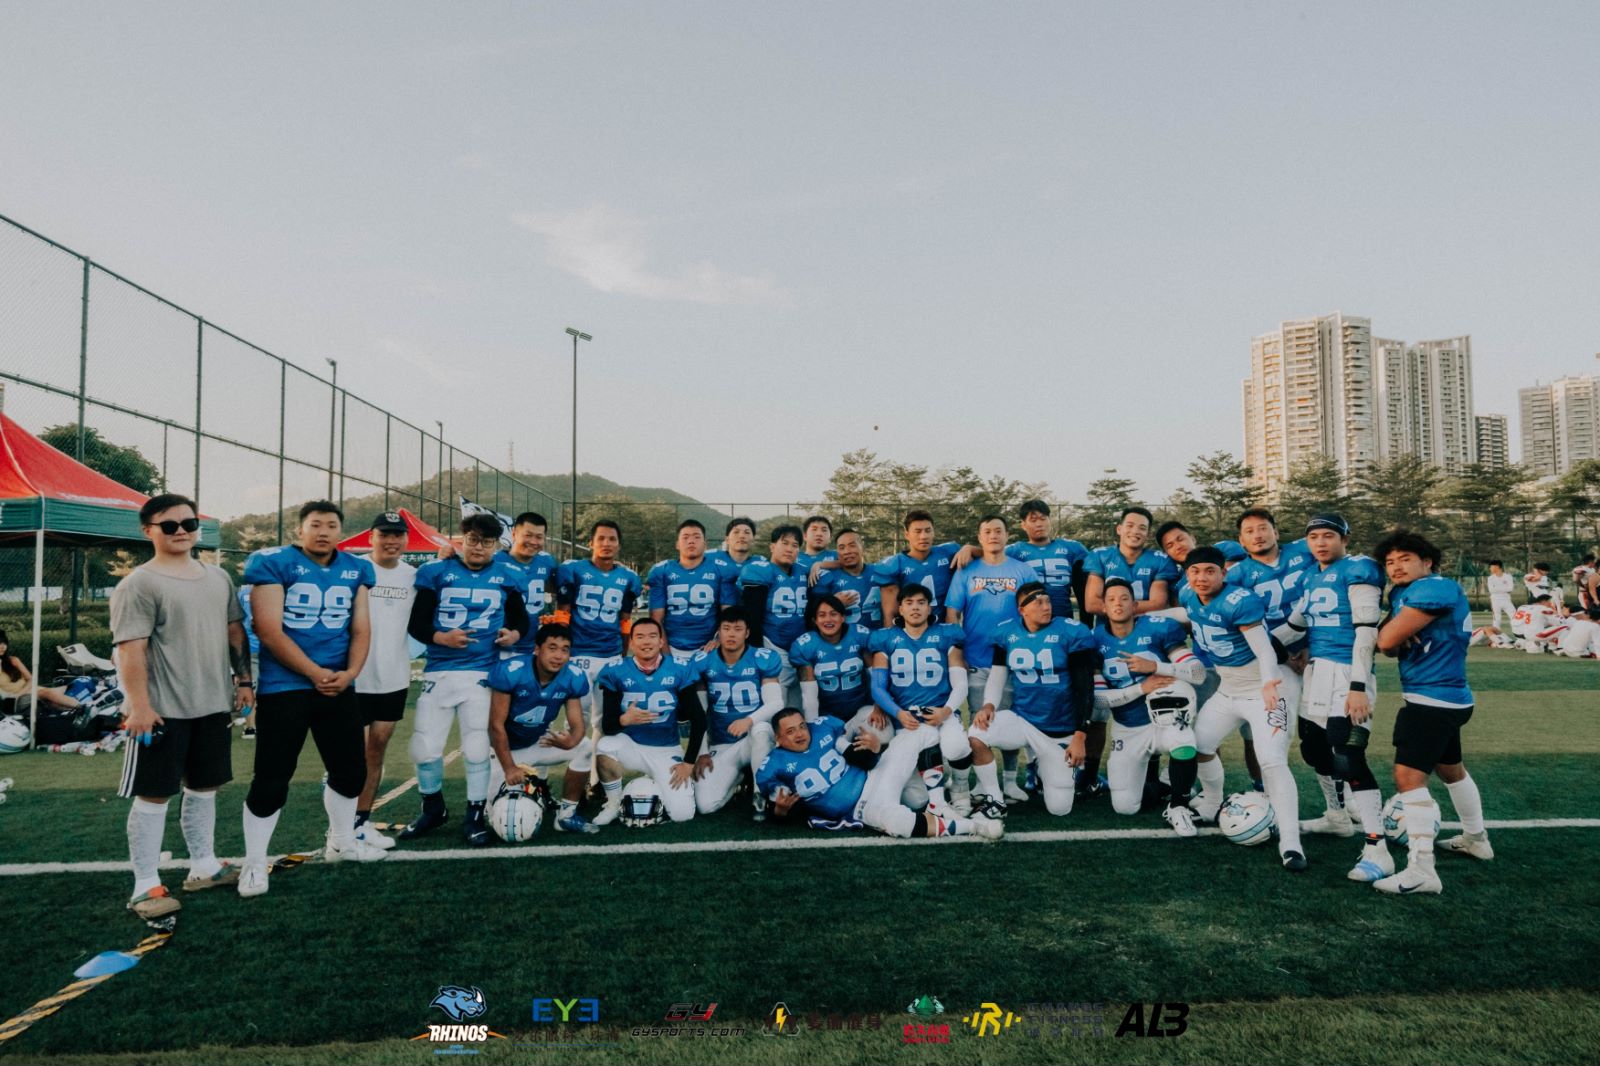 American football has become popular in China